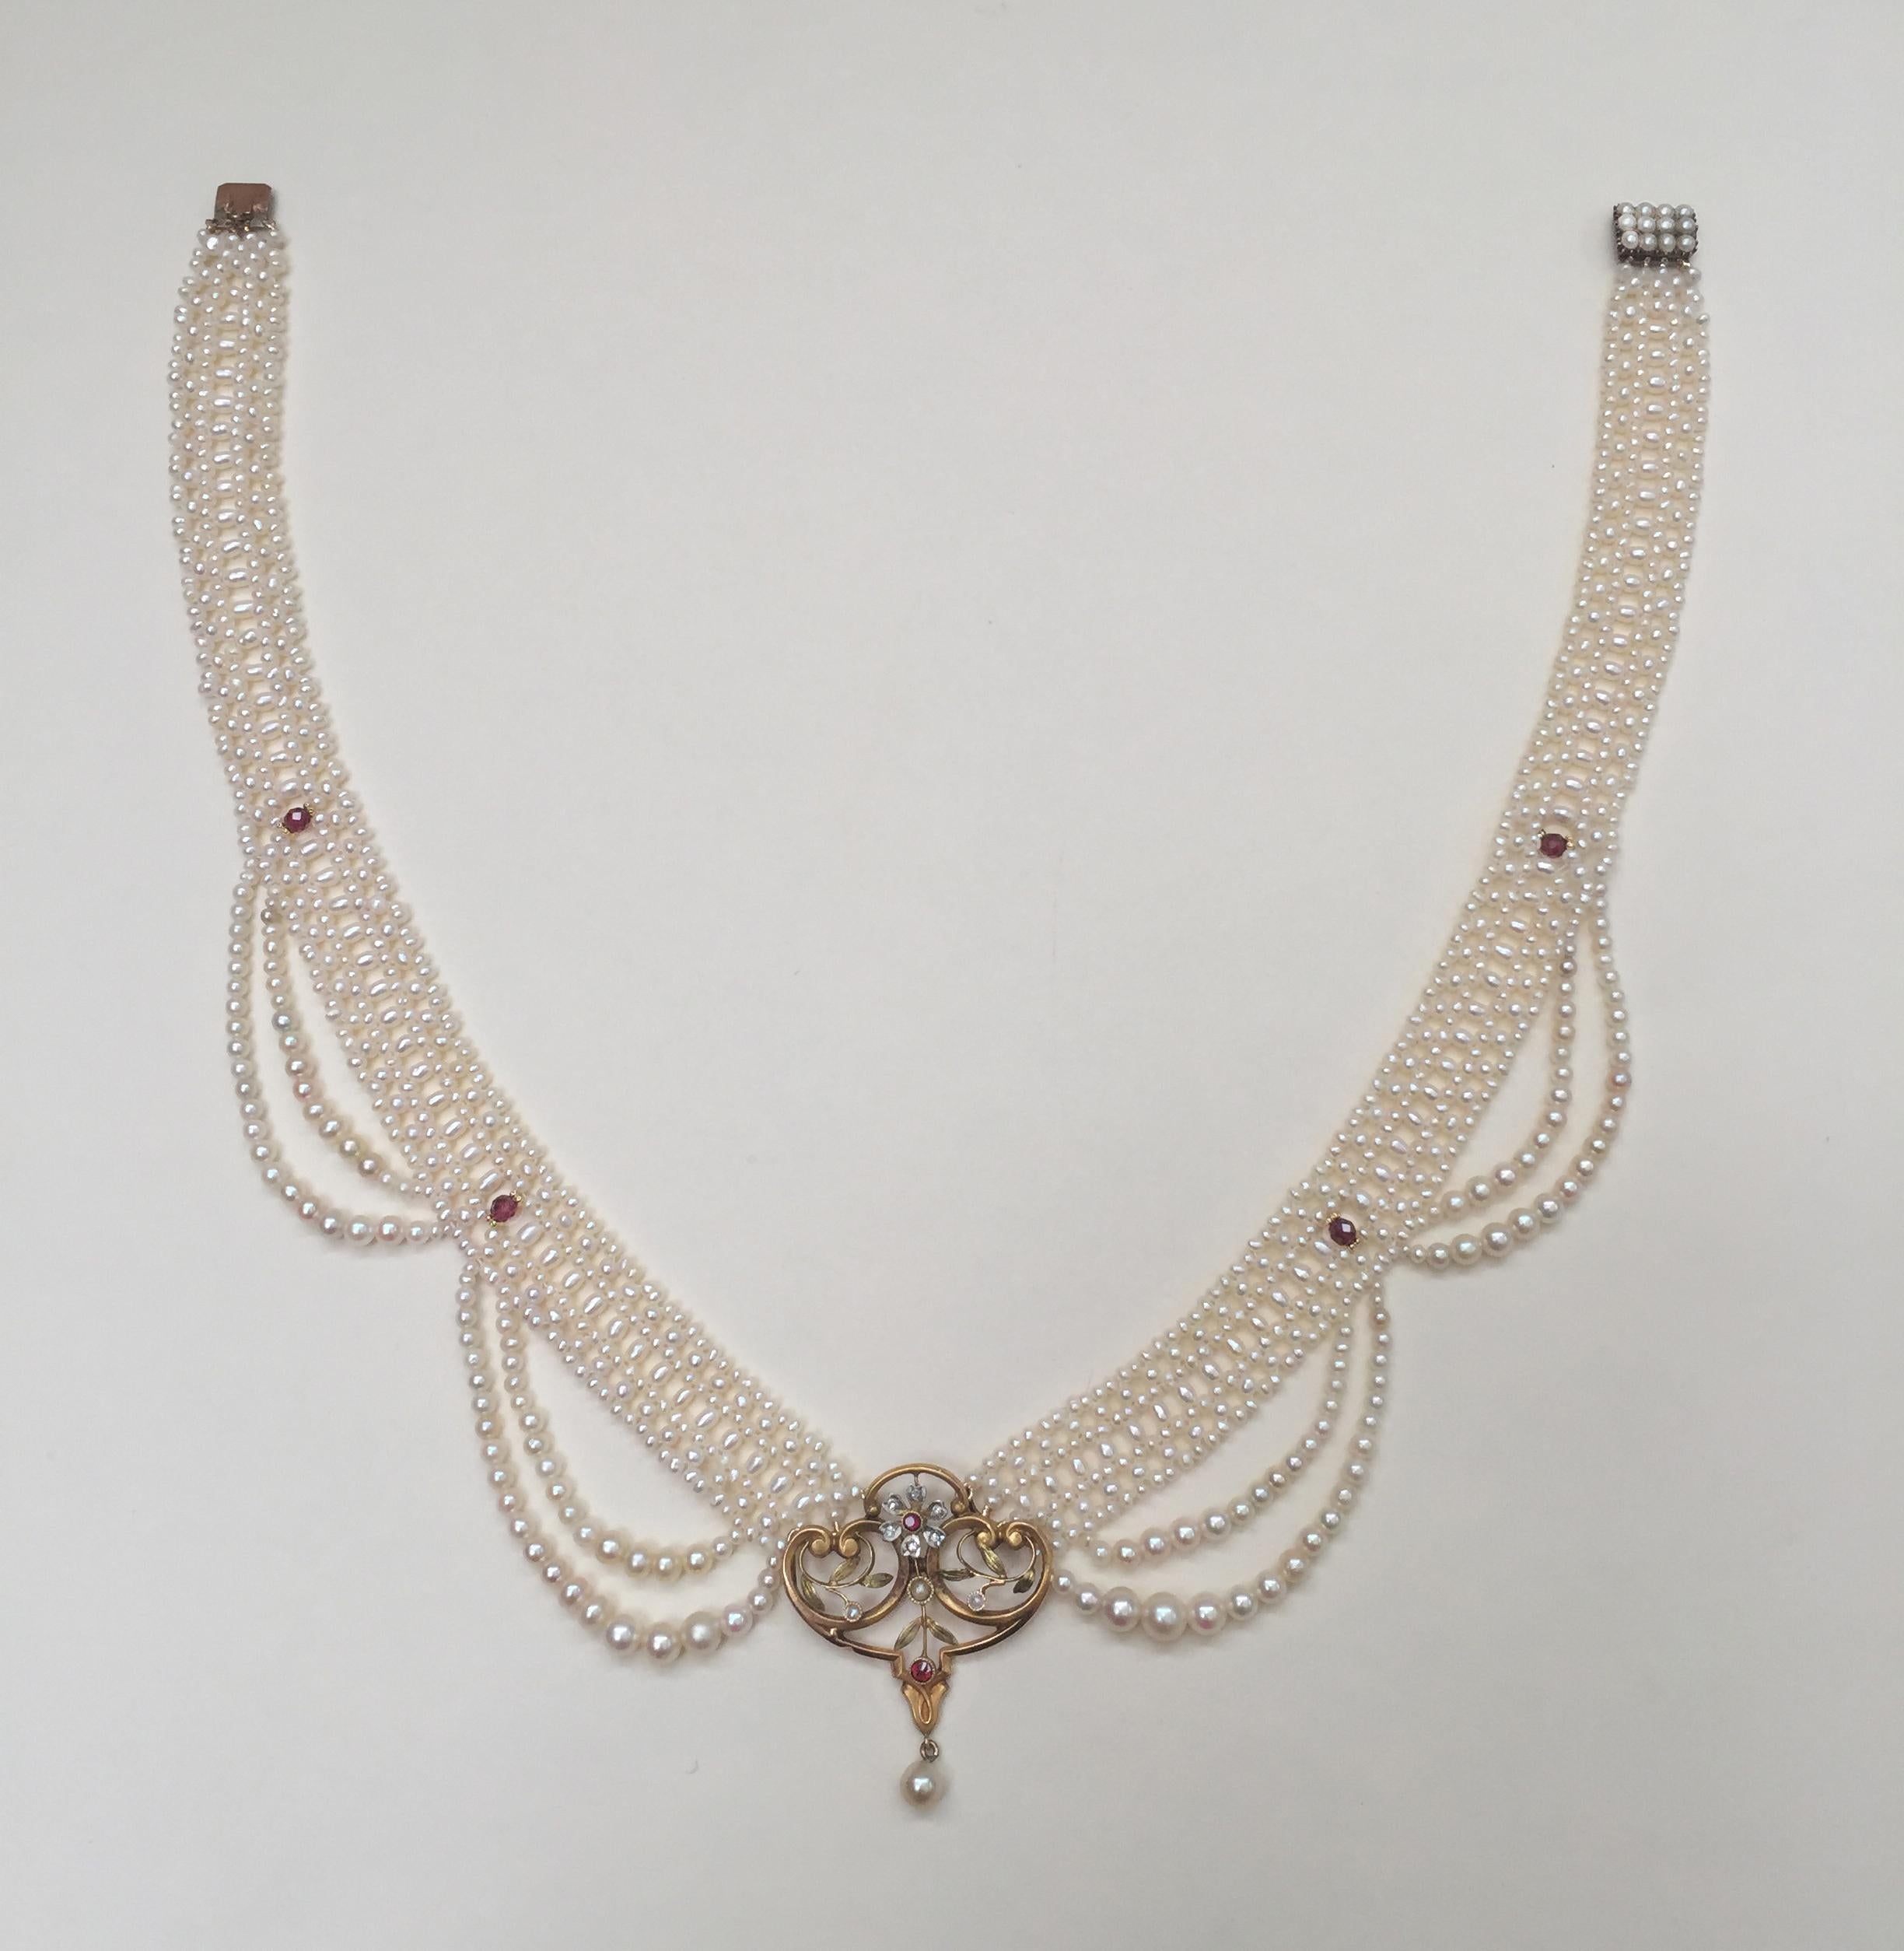 Marina J White Pearl Woven Necklace with Victorian 14k Yellow Gold Centerpiece   2